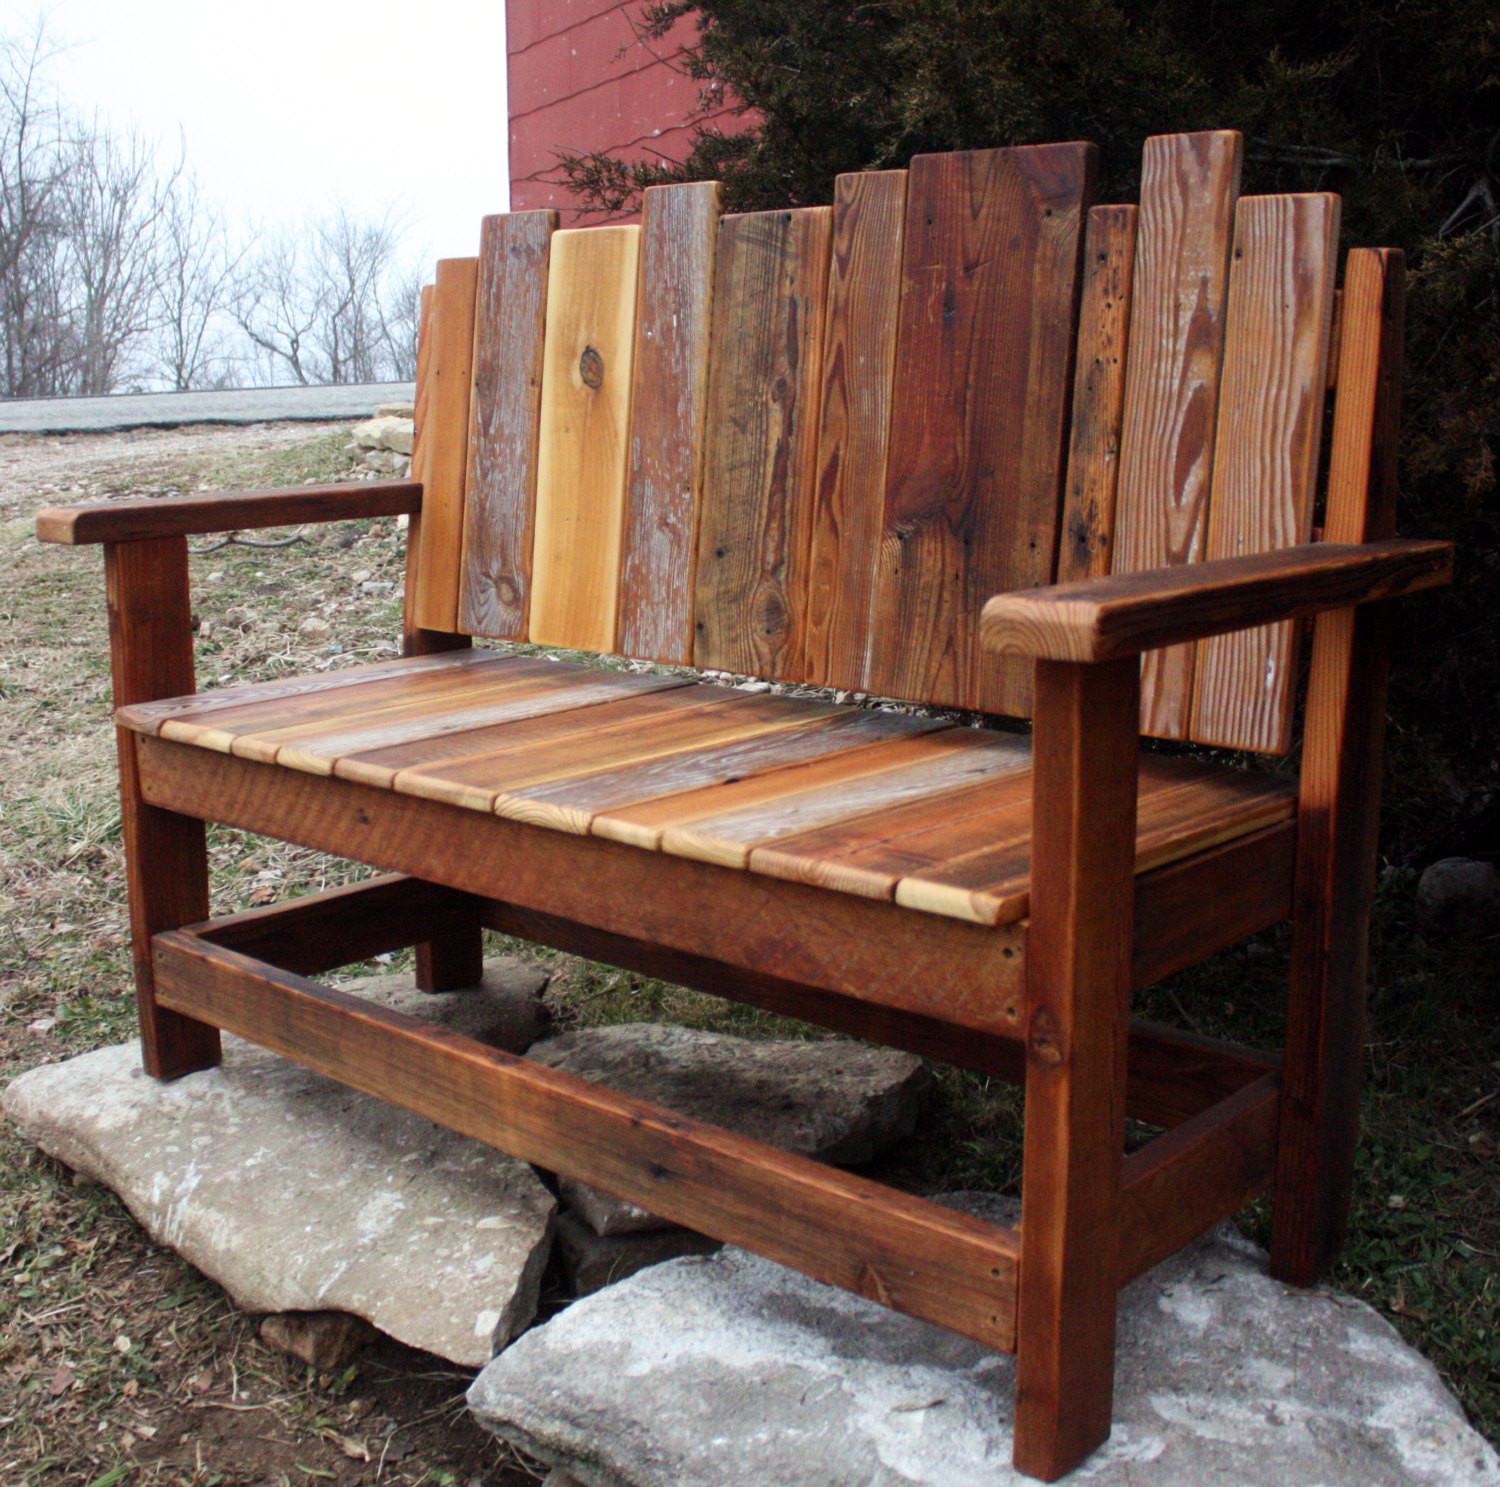 DIY Outdoor Wooden Benches
 21 Amazing Outdoor Bench Ideas Style Motivation